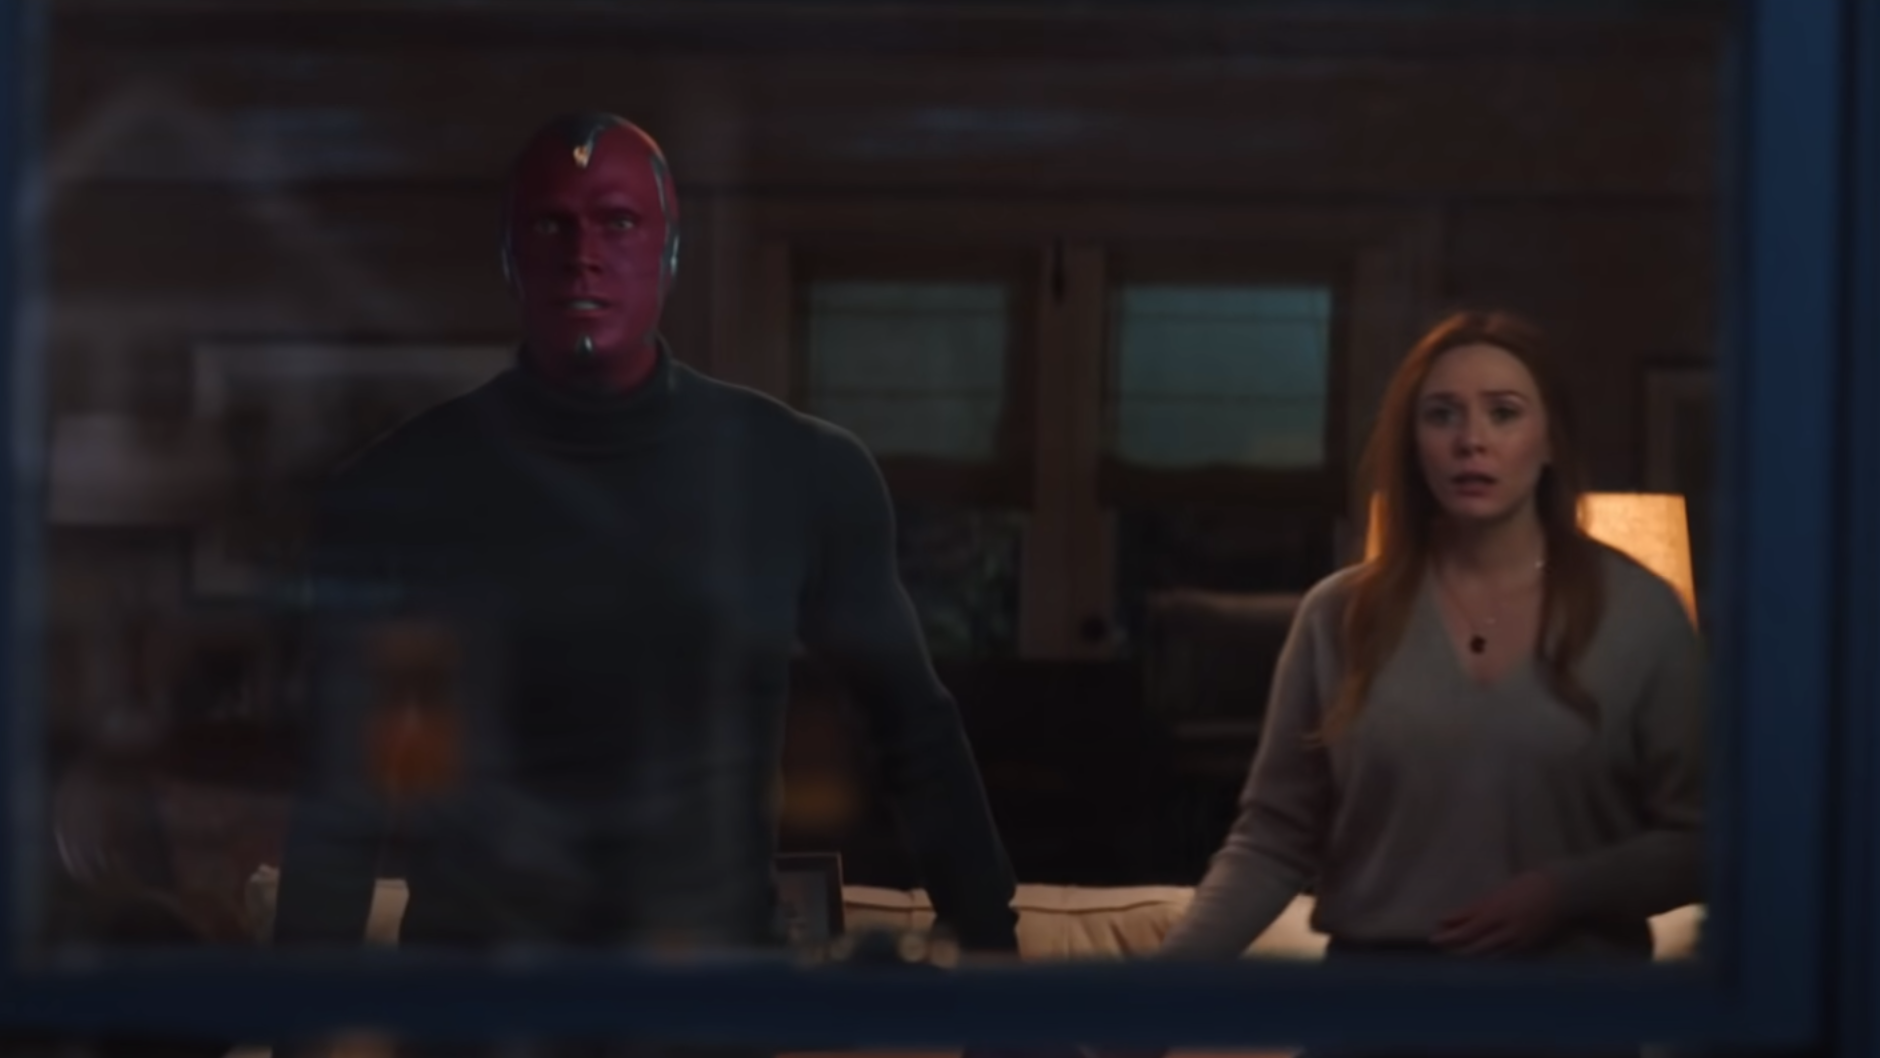 The Vision and the Scarlet Witch fight to defend their home. (Screenshot: Marvel Studios)